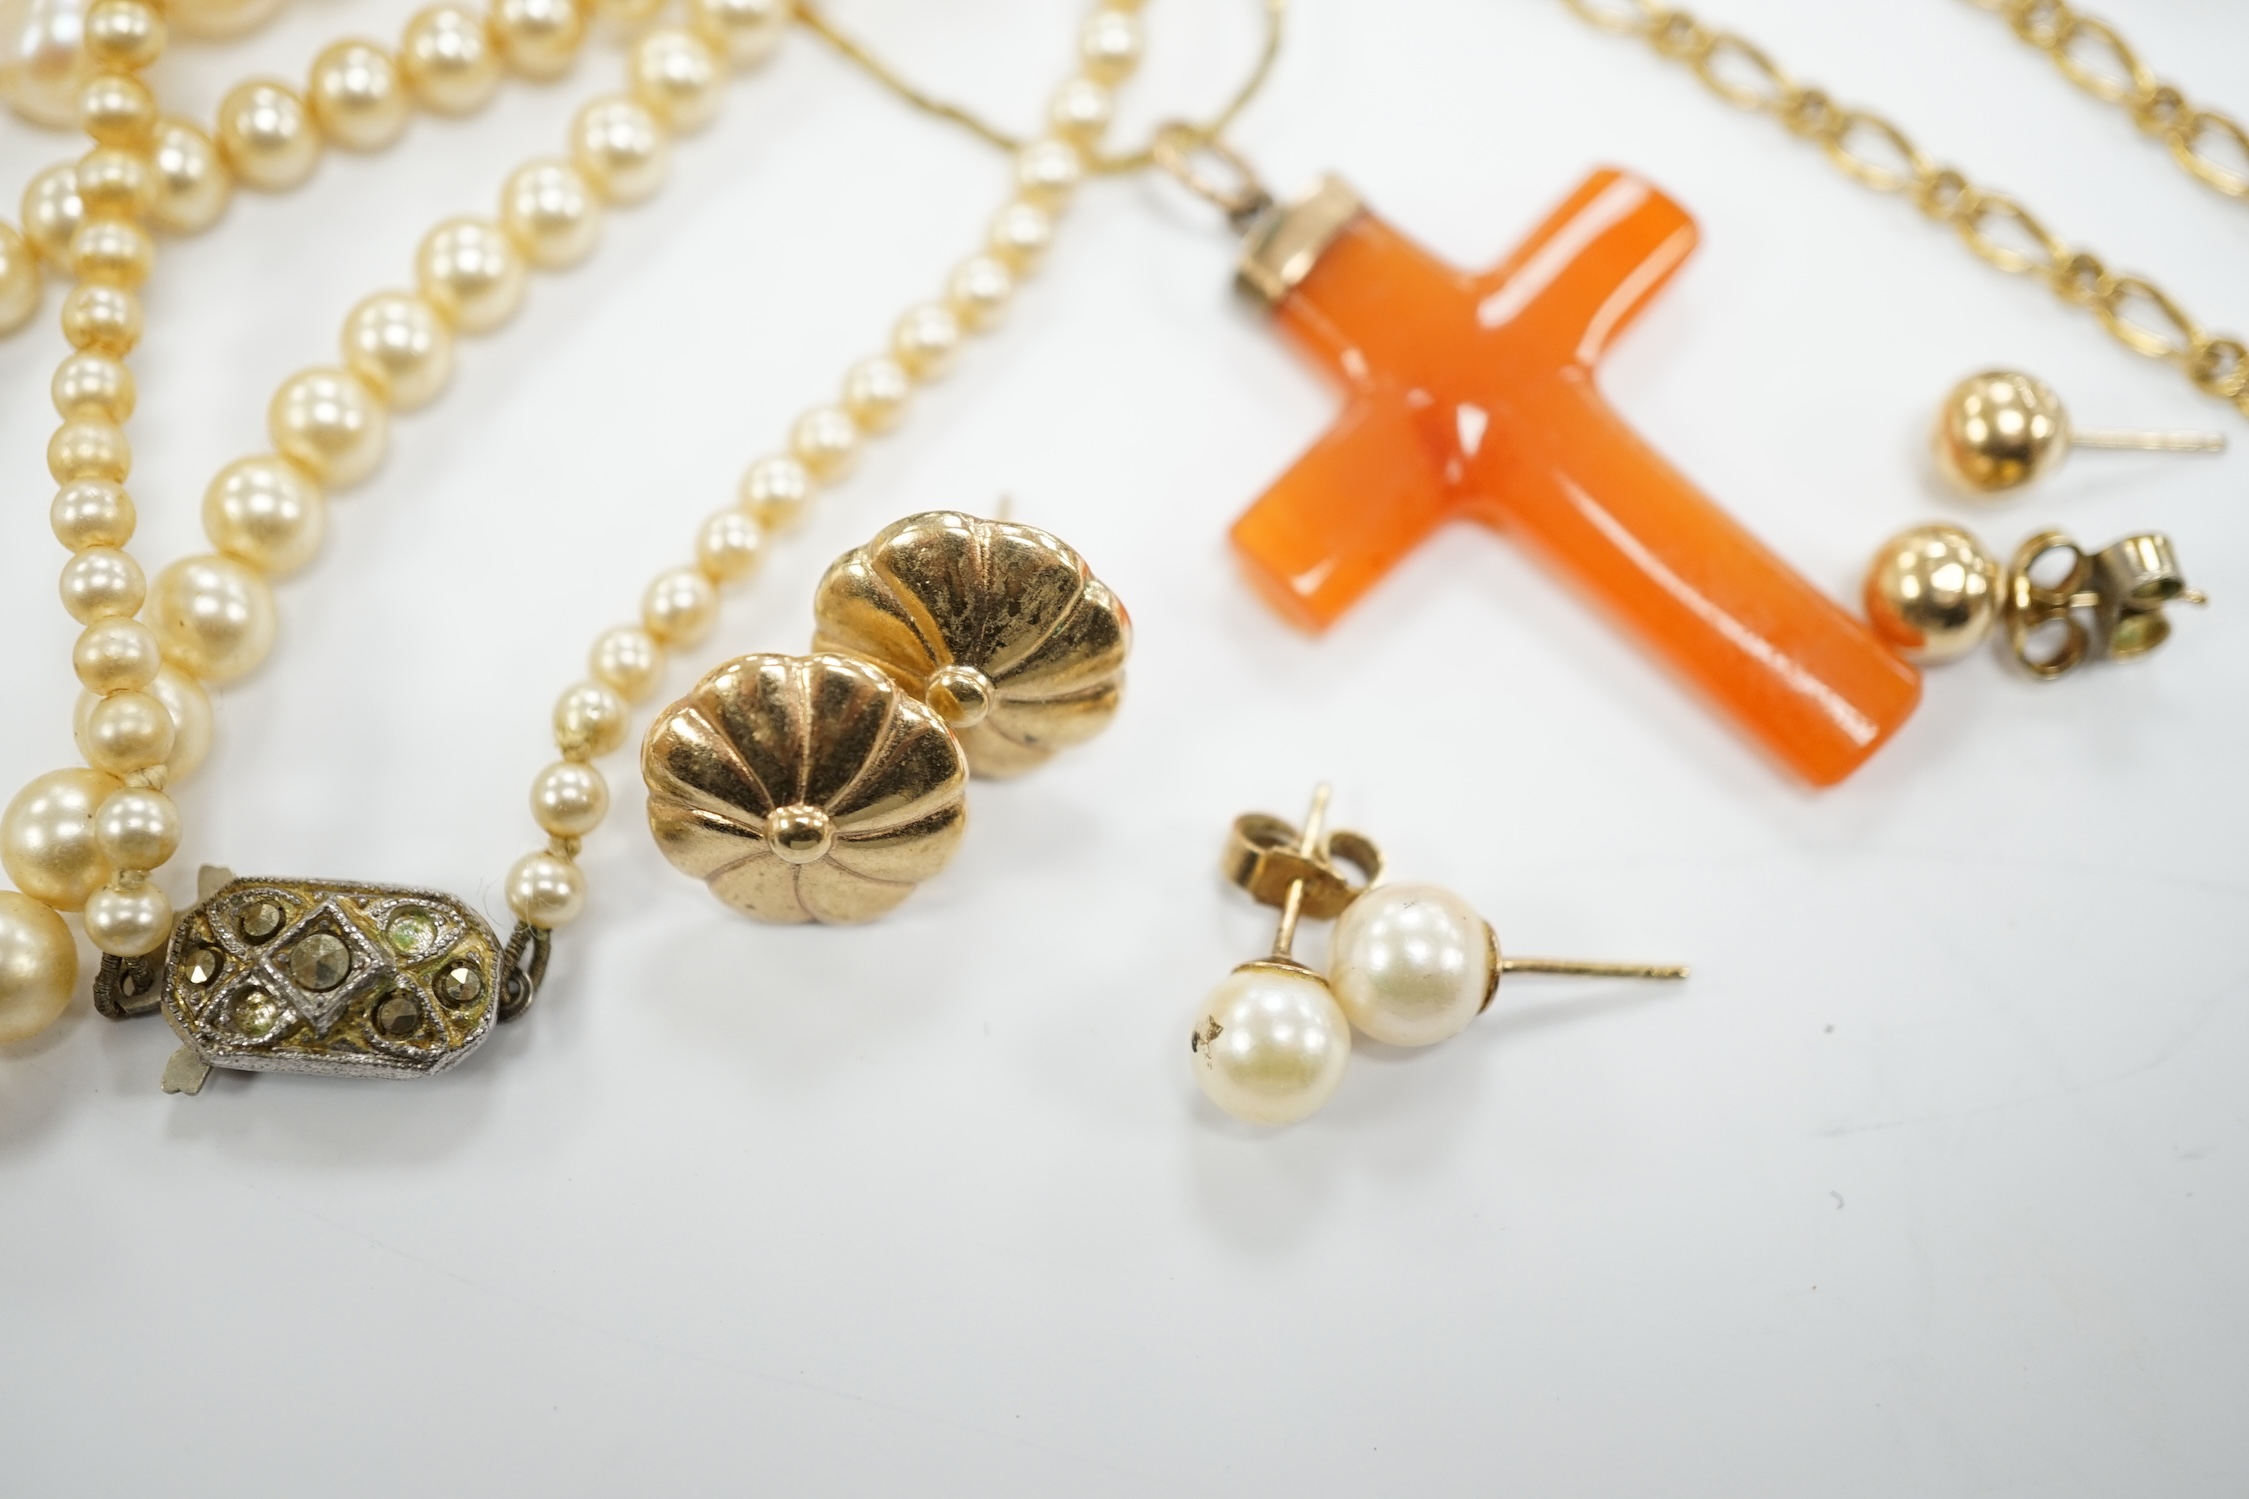 Sundry jewellery including 9ct gold bracelet, 9ct gold chain, three pairs of ear studs, a cultured pearl necklace, a carnelian cross pendant on chain and a simulated pearl necklace.